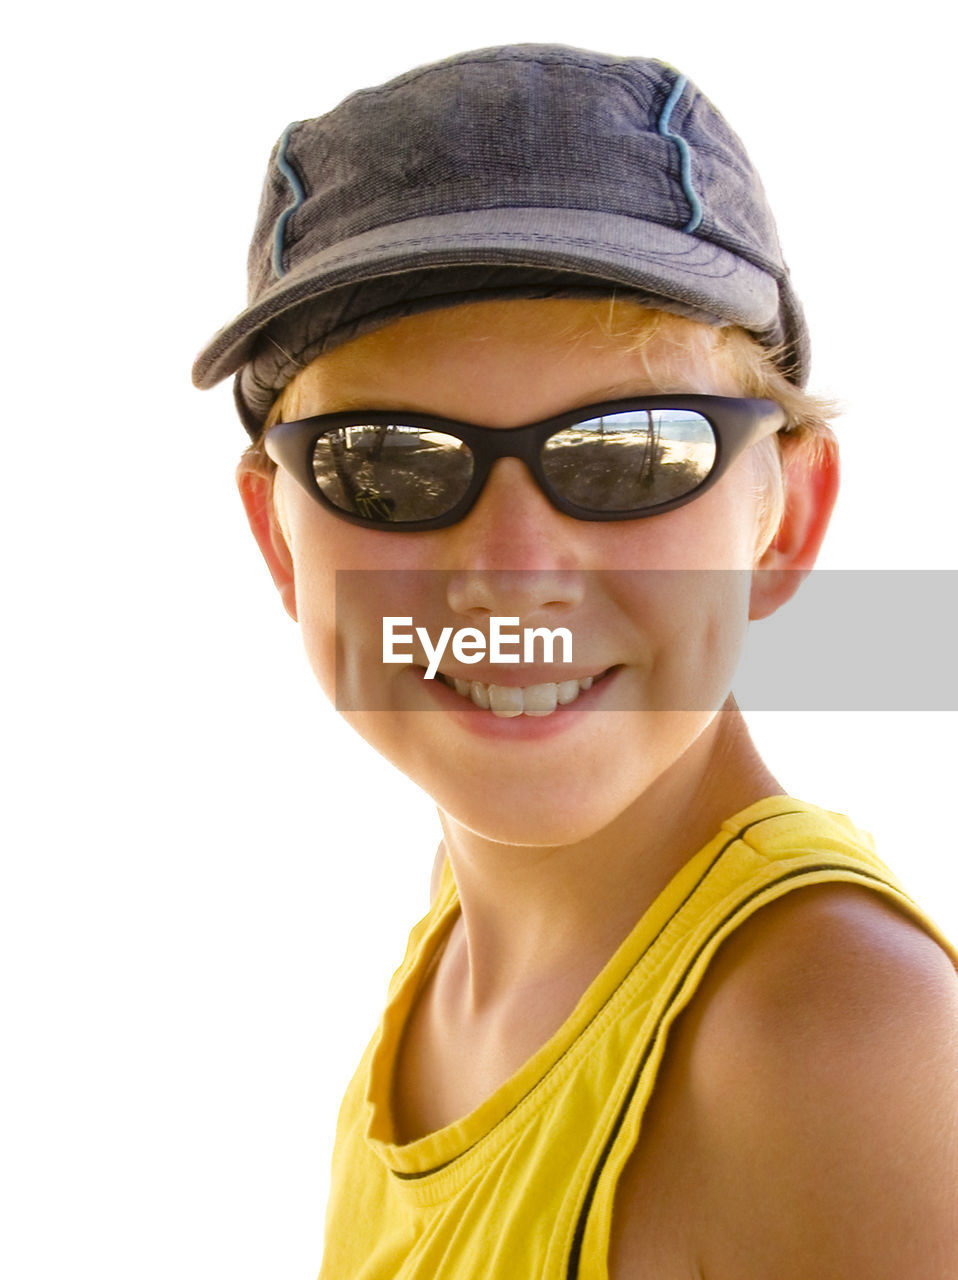 Close-up portrait of smiling boy wearing sunglasses and cap on sunny day